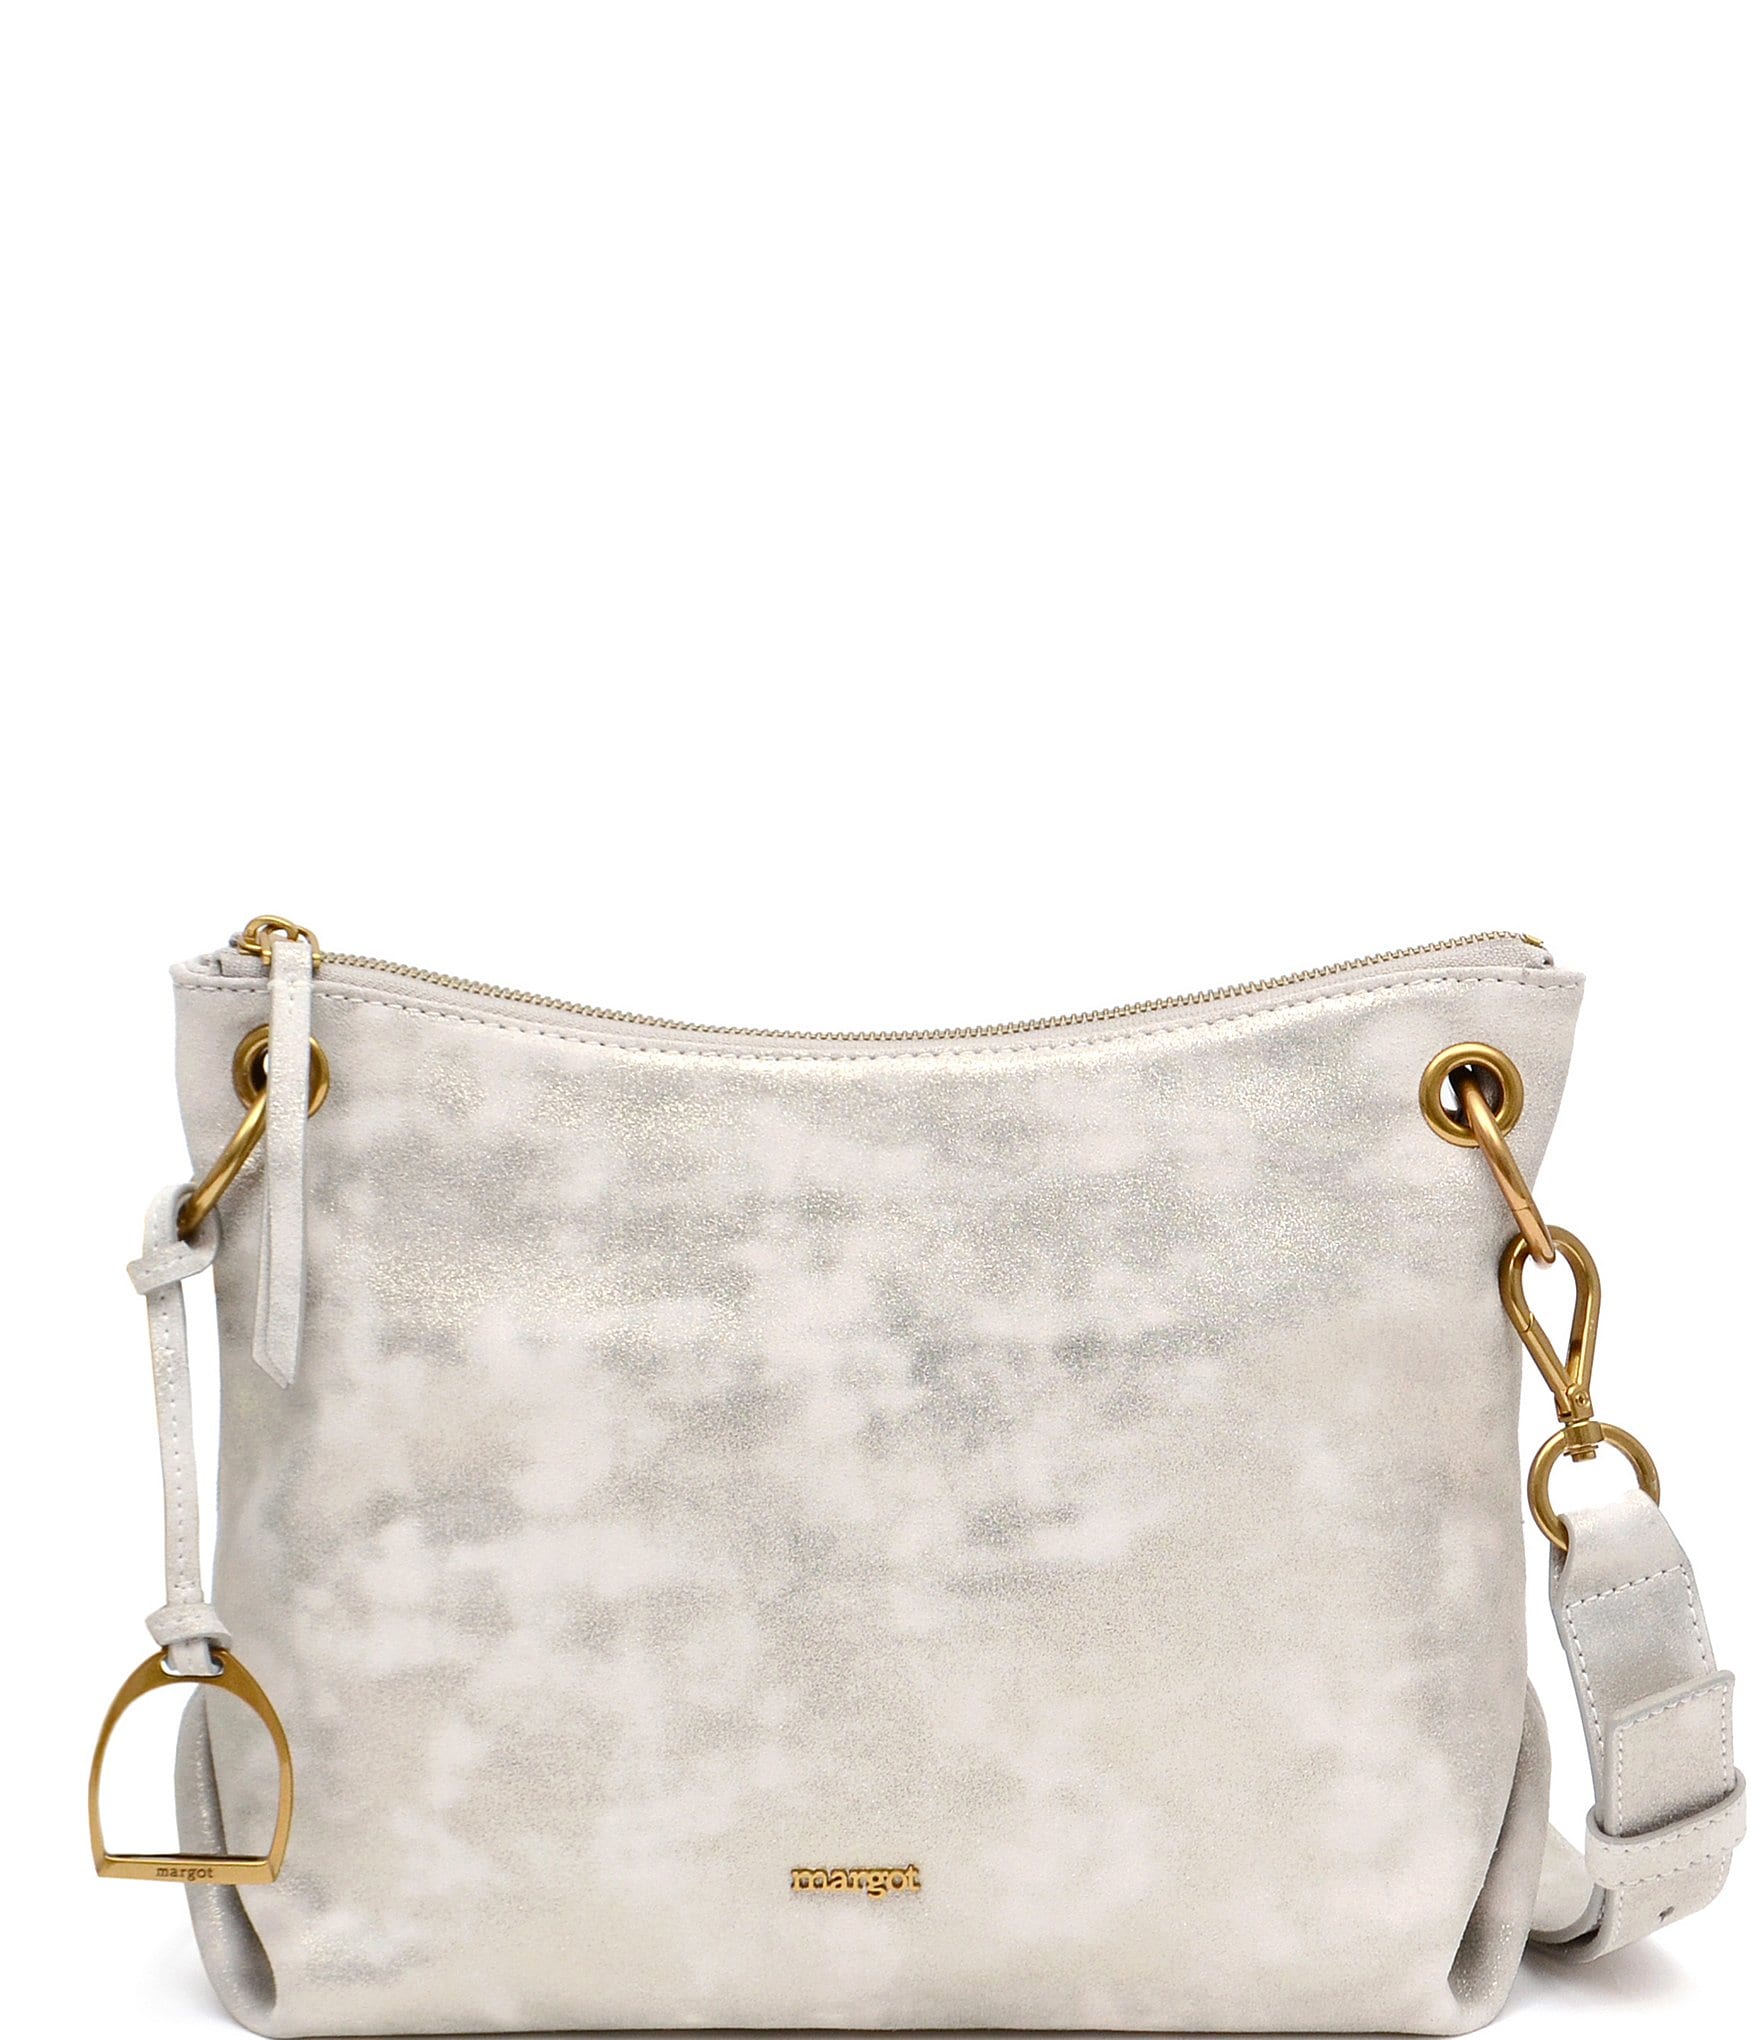 Margot Camile Metallic Marbled Leather Crossbody Bag - Champagne